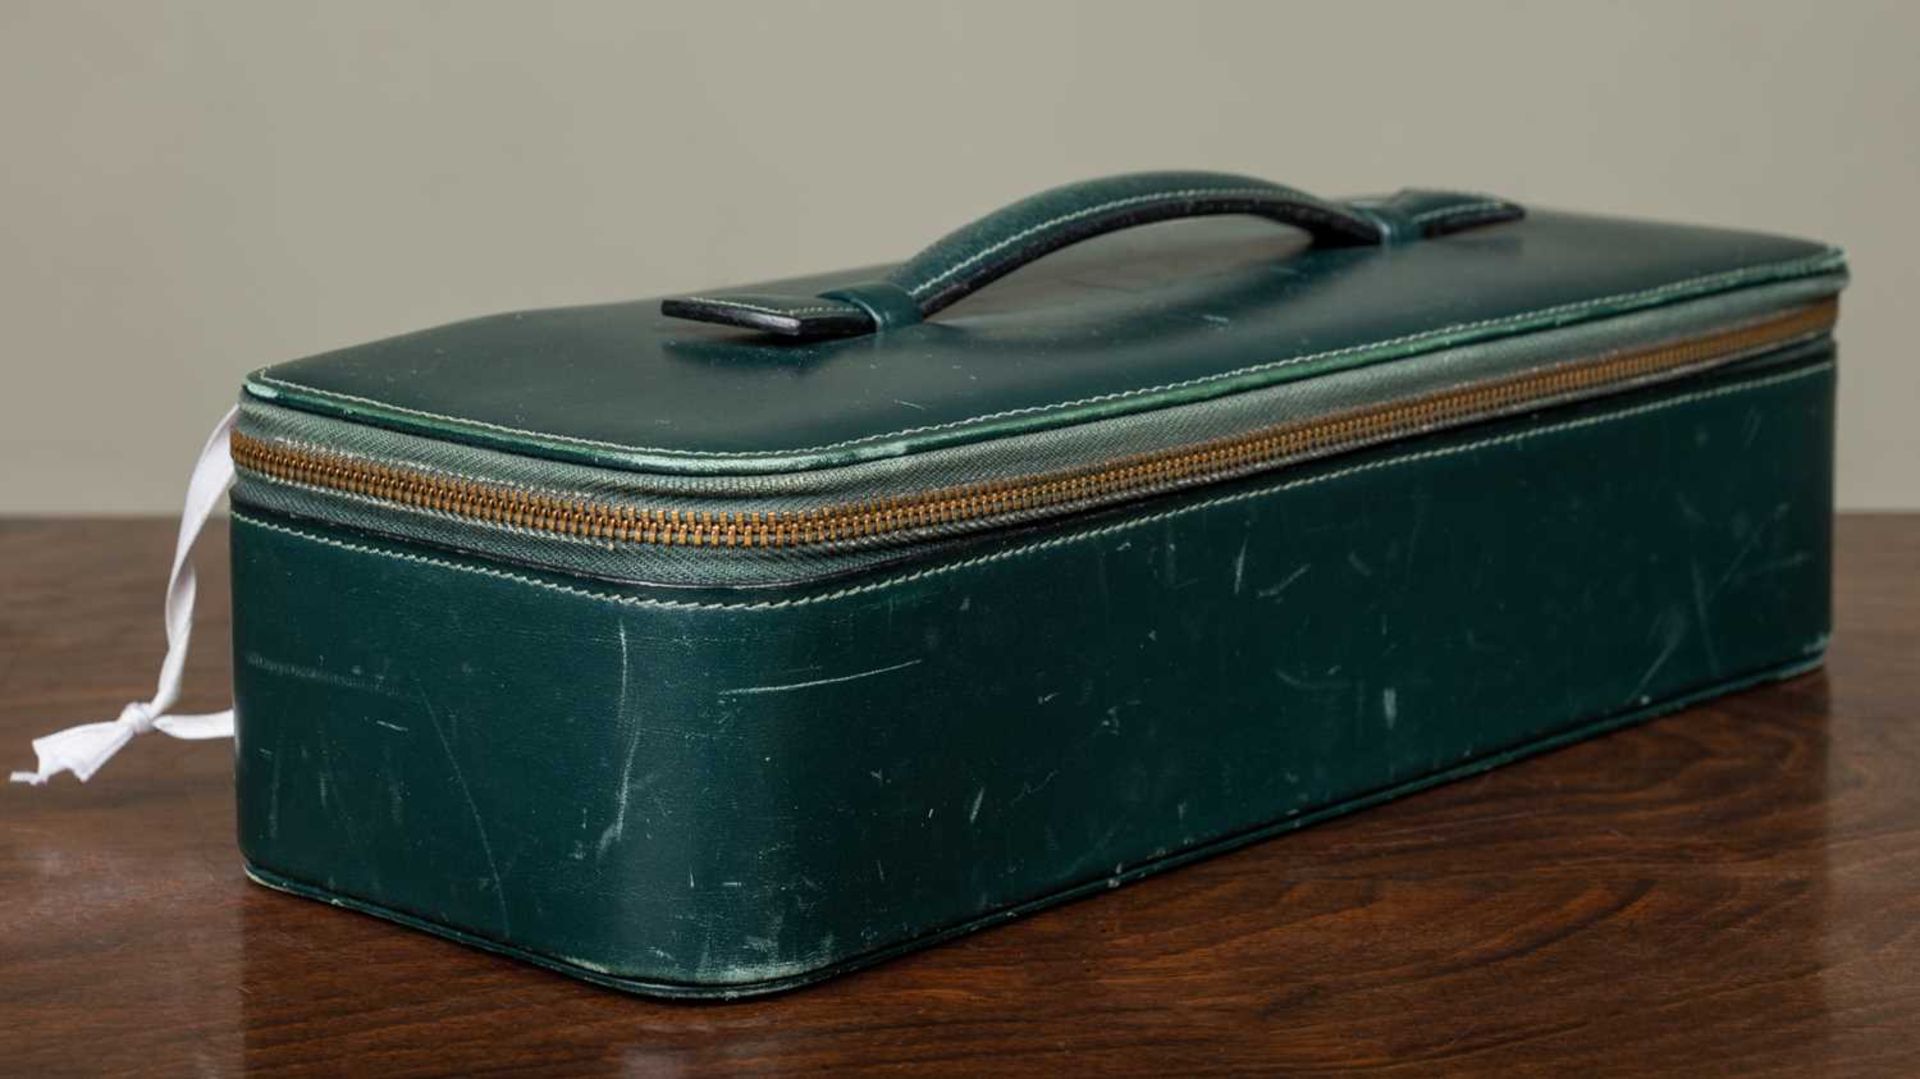 A Hermès 'Kelly' green leather handbag and matching jewellery case, the bag 33cm wide at the base - Image 12 of 18